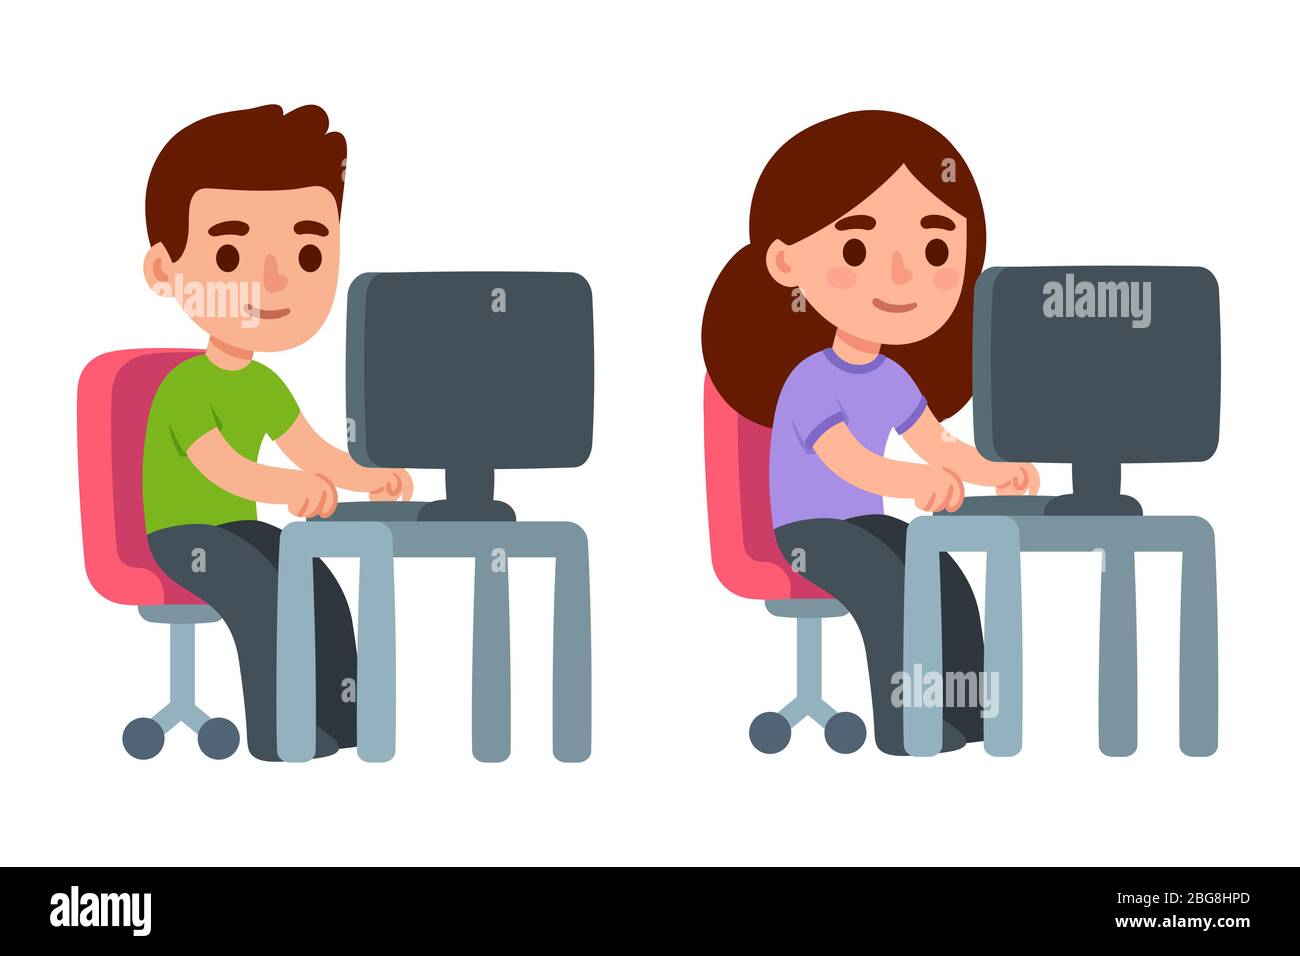 Cartoon characters working on computer at office desk. Cute guy and girl, students or employees. Simple flat style vector illustration. Stock Vector